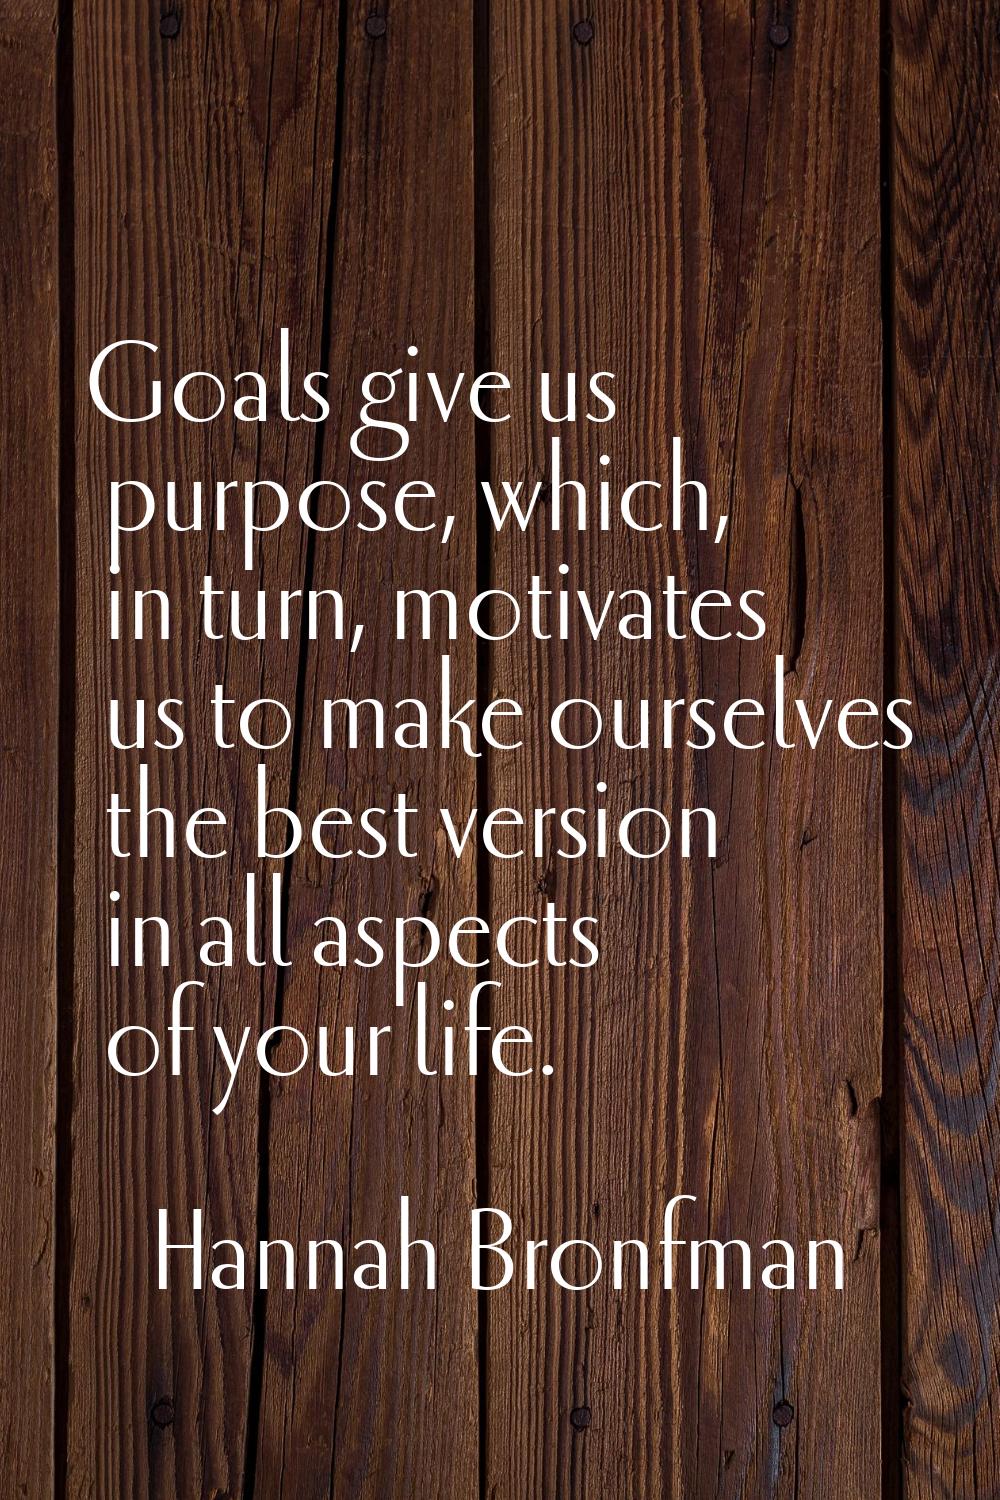 Goals give us purpose, which, in turn, motivates us to make ourselves the best version in all aspec